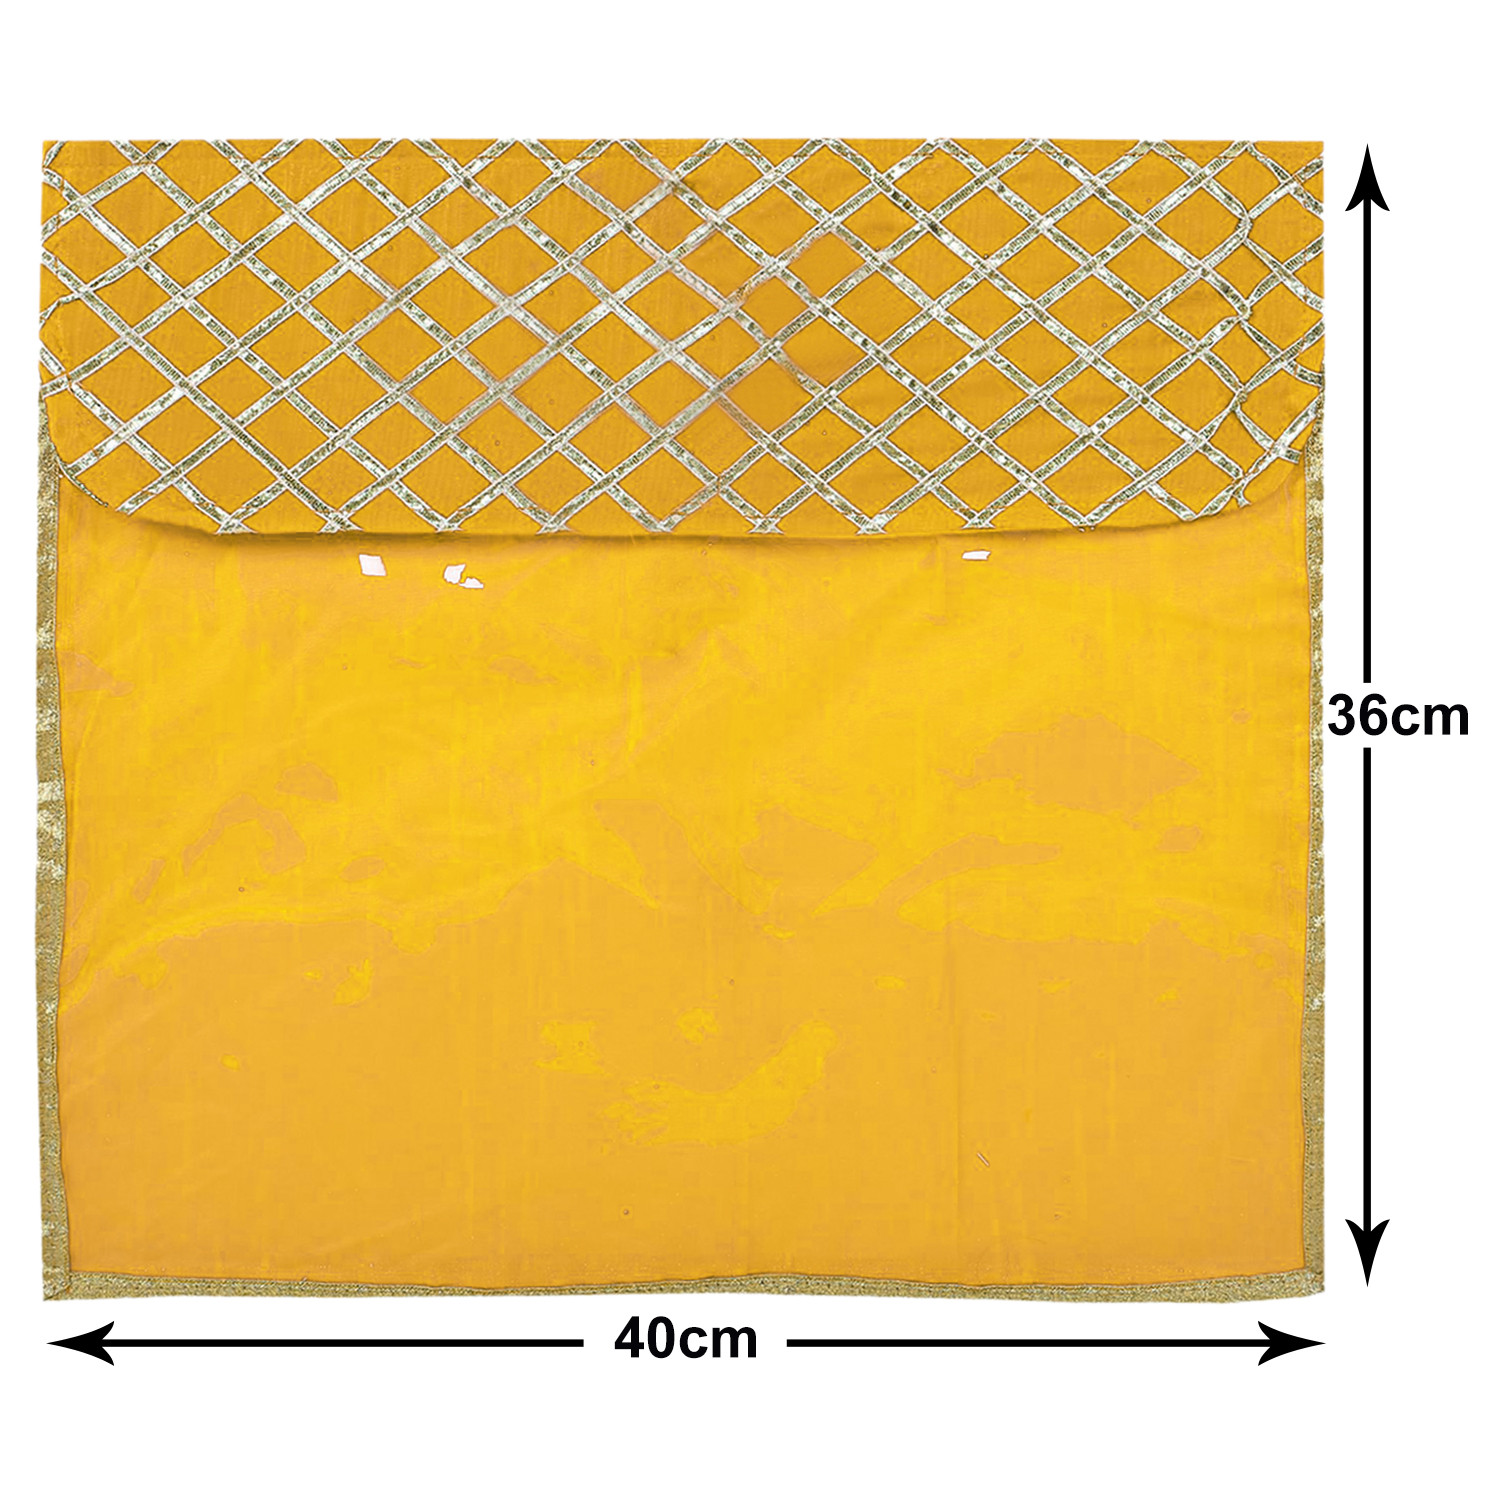 Kuber Industries Seamless lattice Design Satin Foldable, Lightweigth Single Saree Cover/Organiser For Wardrobe With Transparent Top-(Yellow)